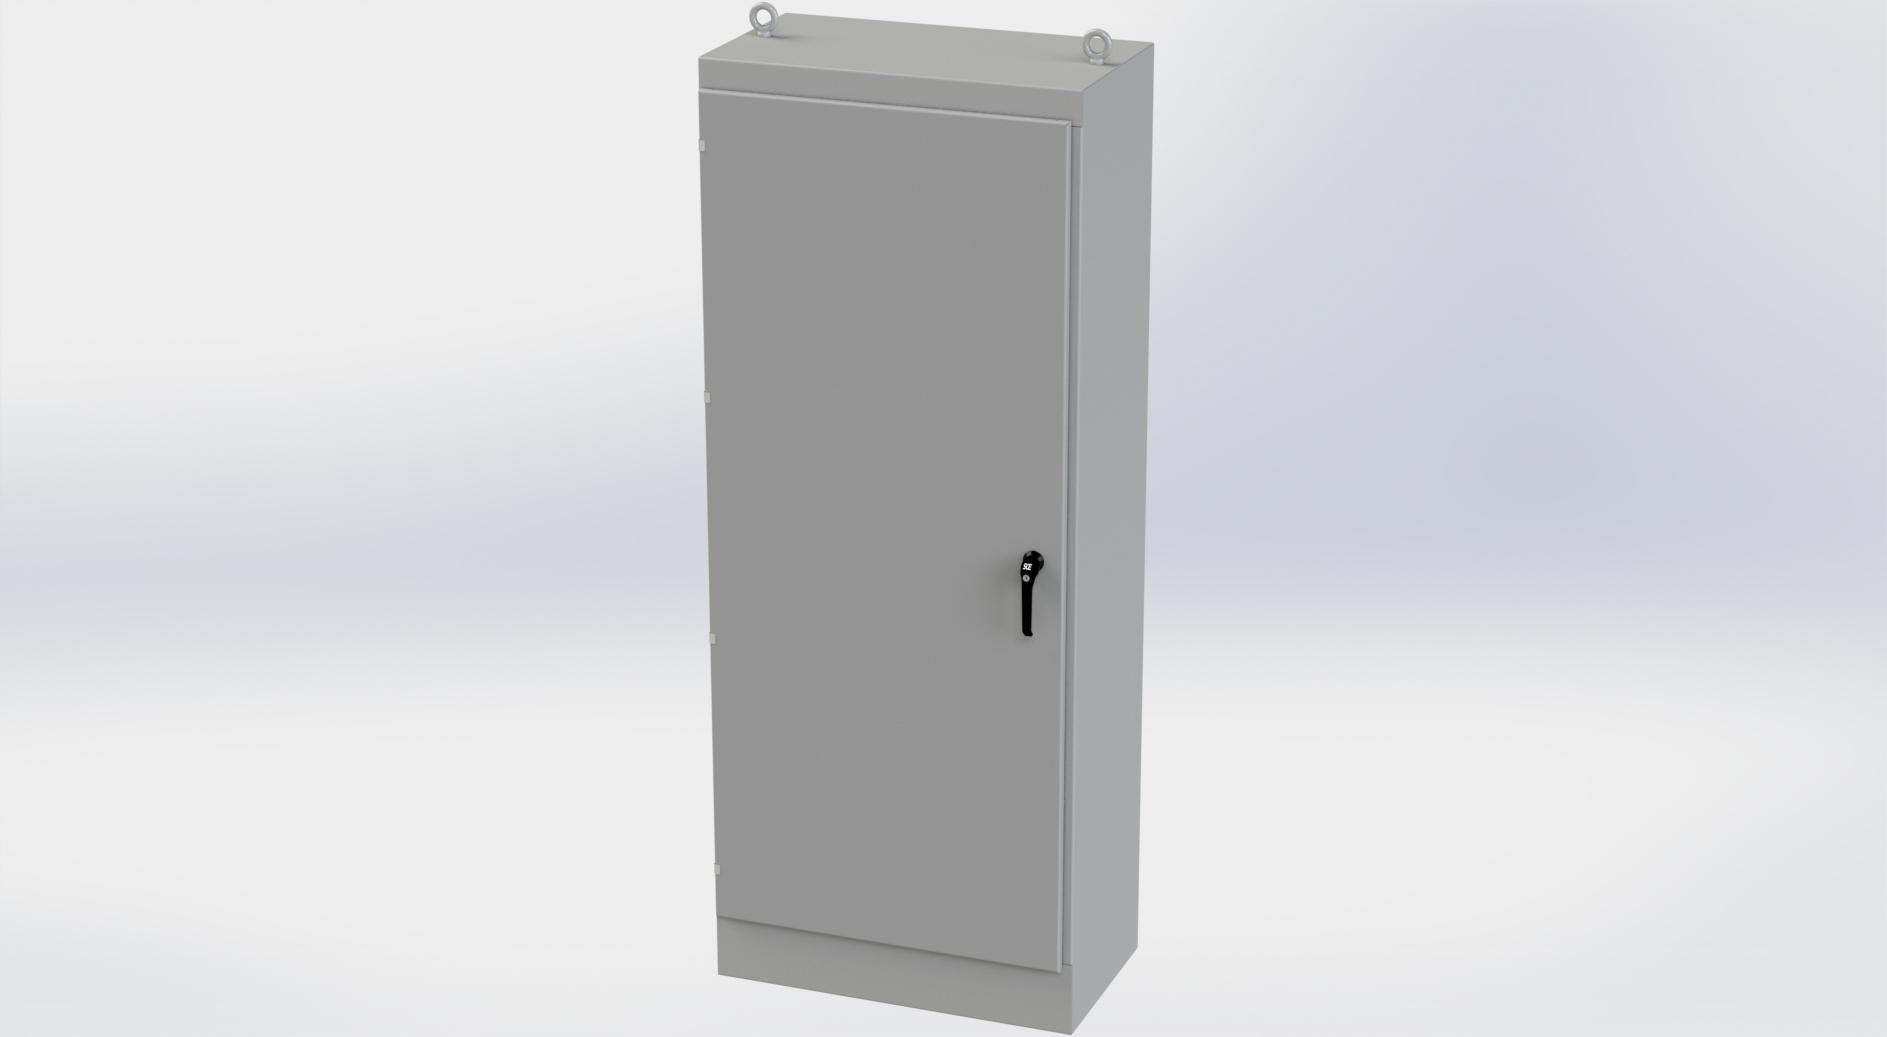 Saginaw Control SCE-903620FS FS Enclosure, Height:90.00", Width:36.00", Depth:20.00", ANSI-61 gray powder coat inside and out. Optional sub-panels are powder coated white.